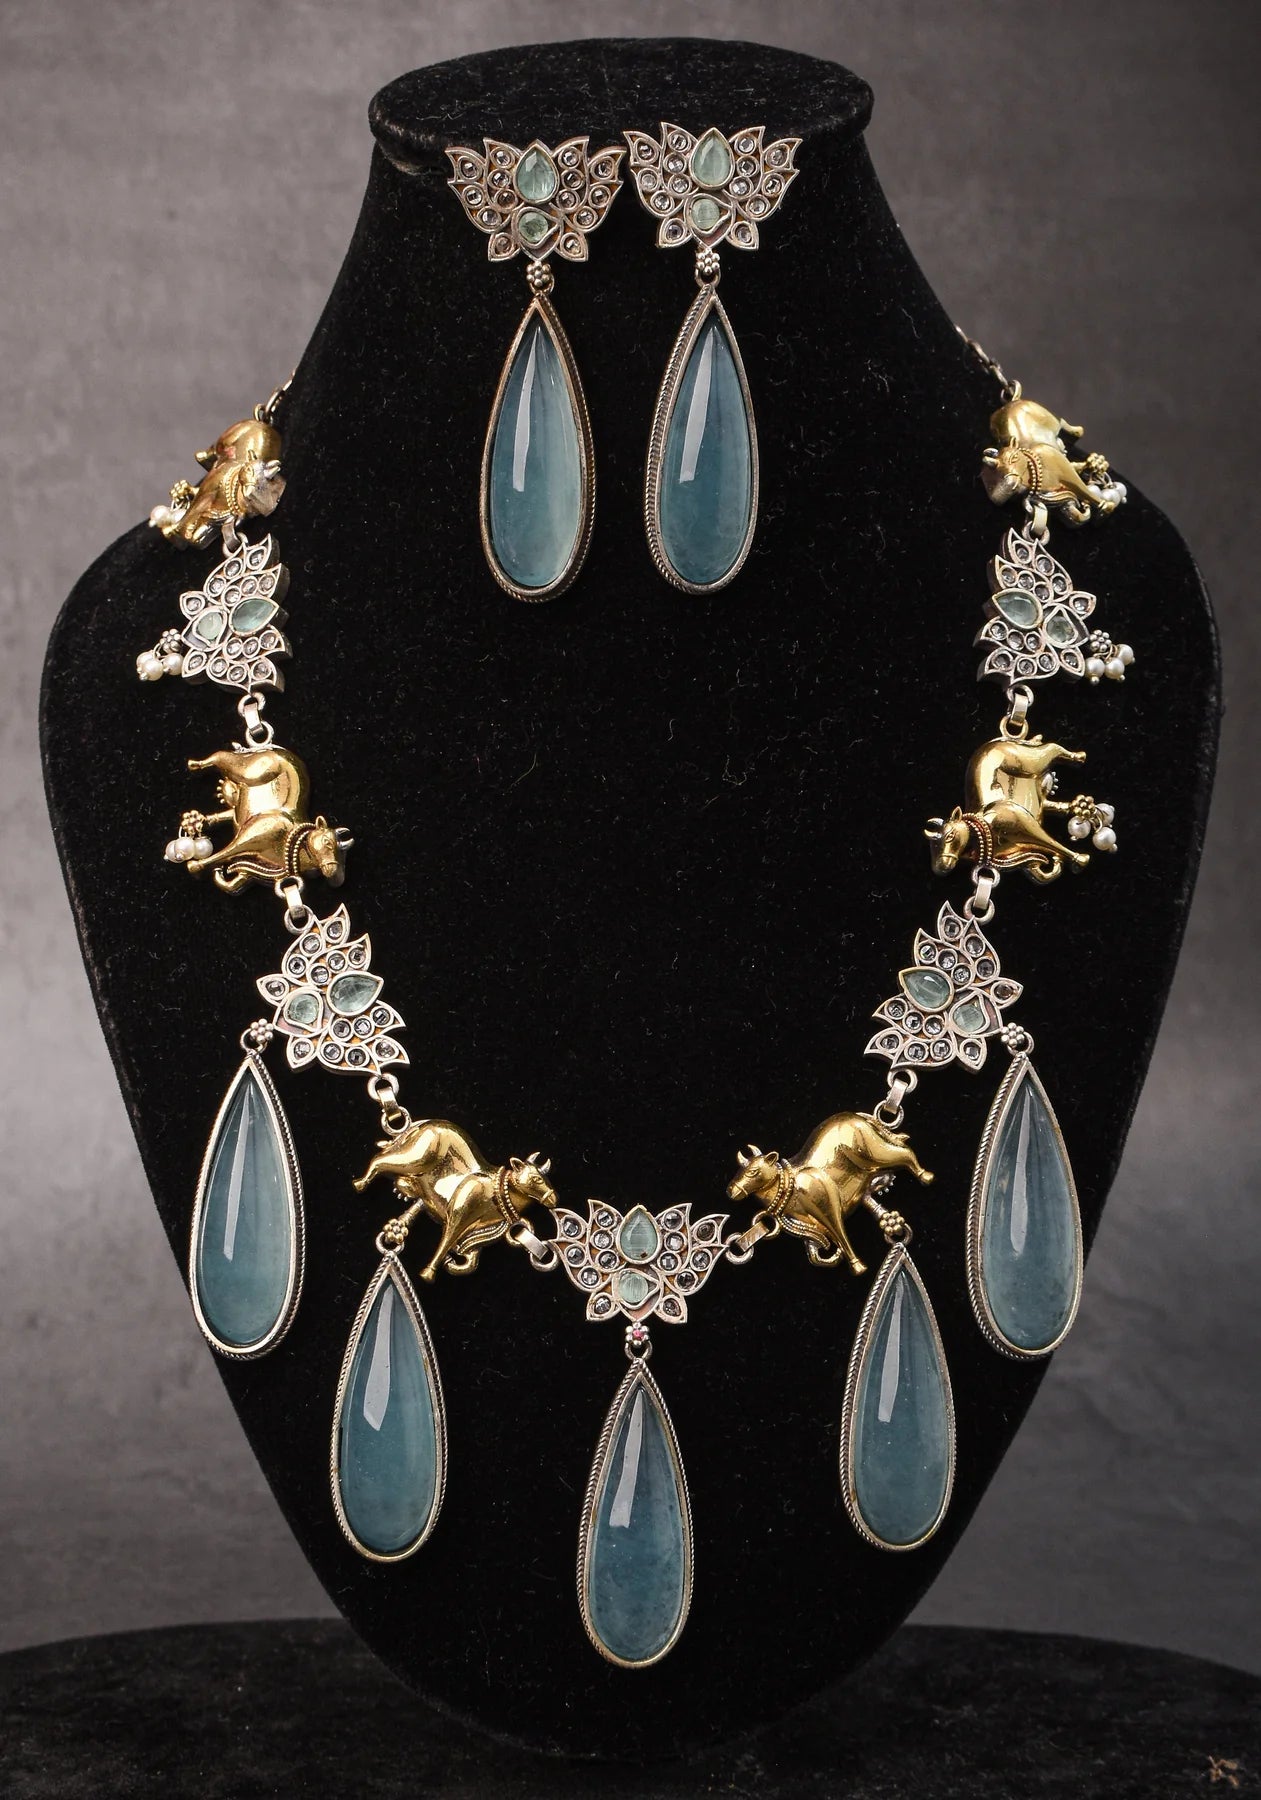 Fusion Dual Tone Jewelry with Pichwai Cow Units and Heather Blue Stones